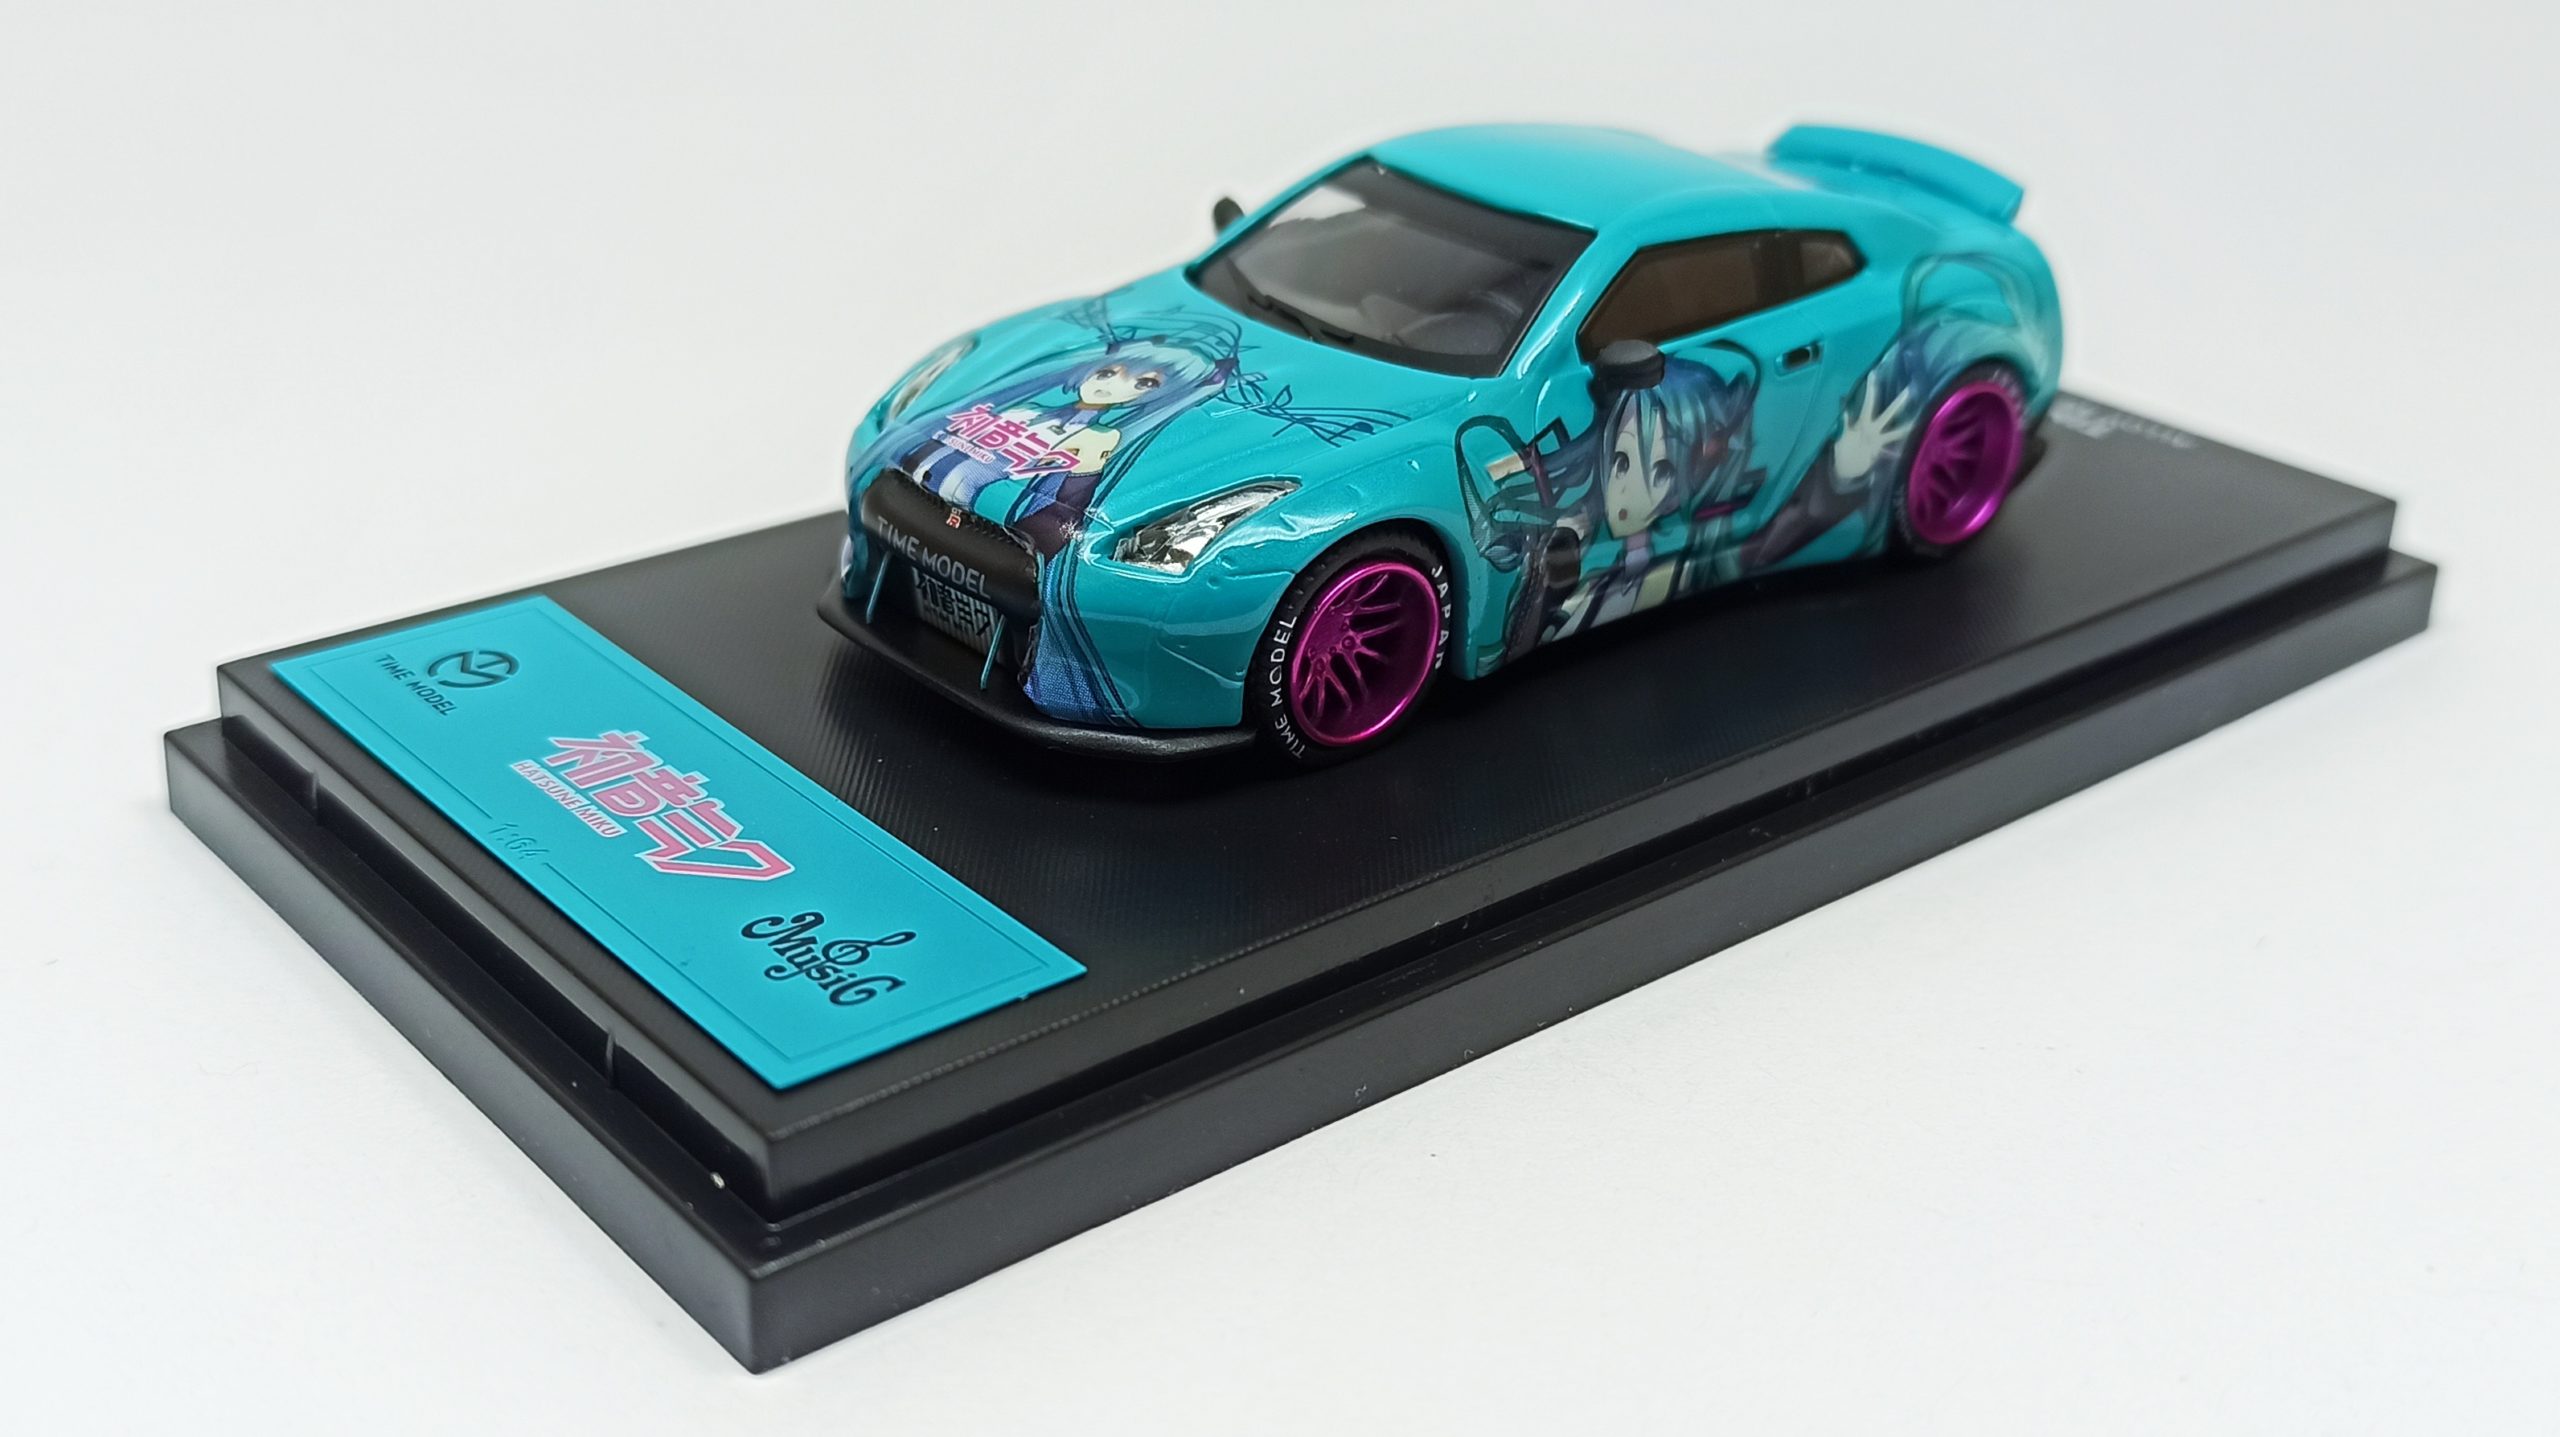 Time Micro Time Model Nissan GT-R (R35) LB Performance Liberty Walk (GT wing / duck tail) Miku Hatsune light turquoise